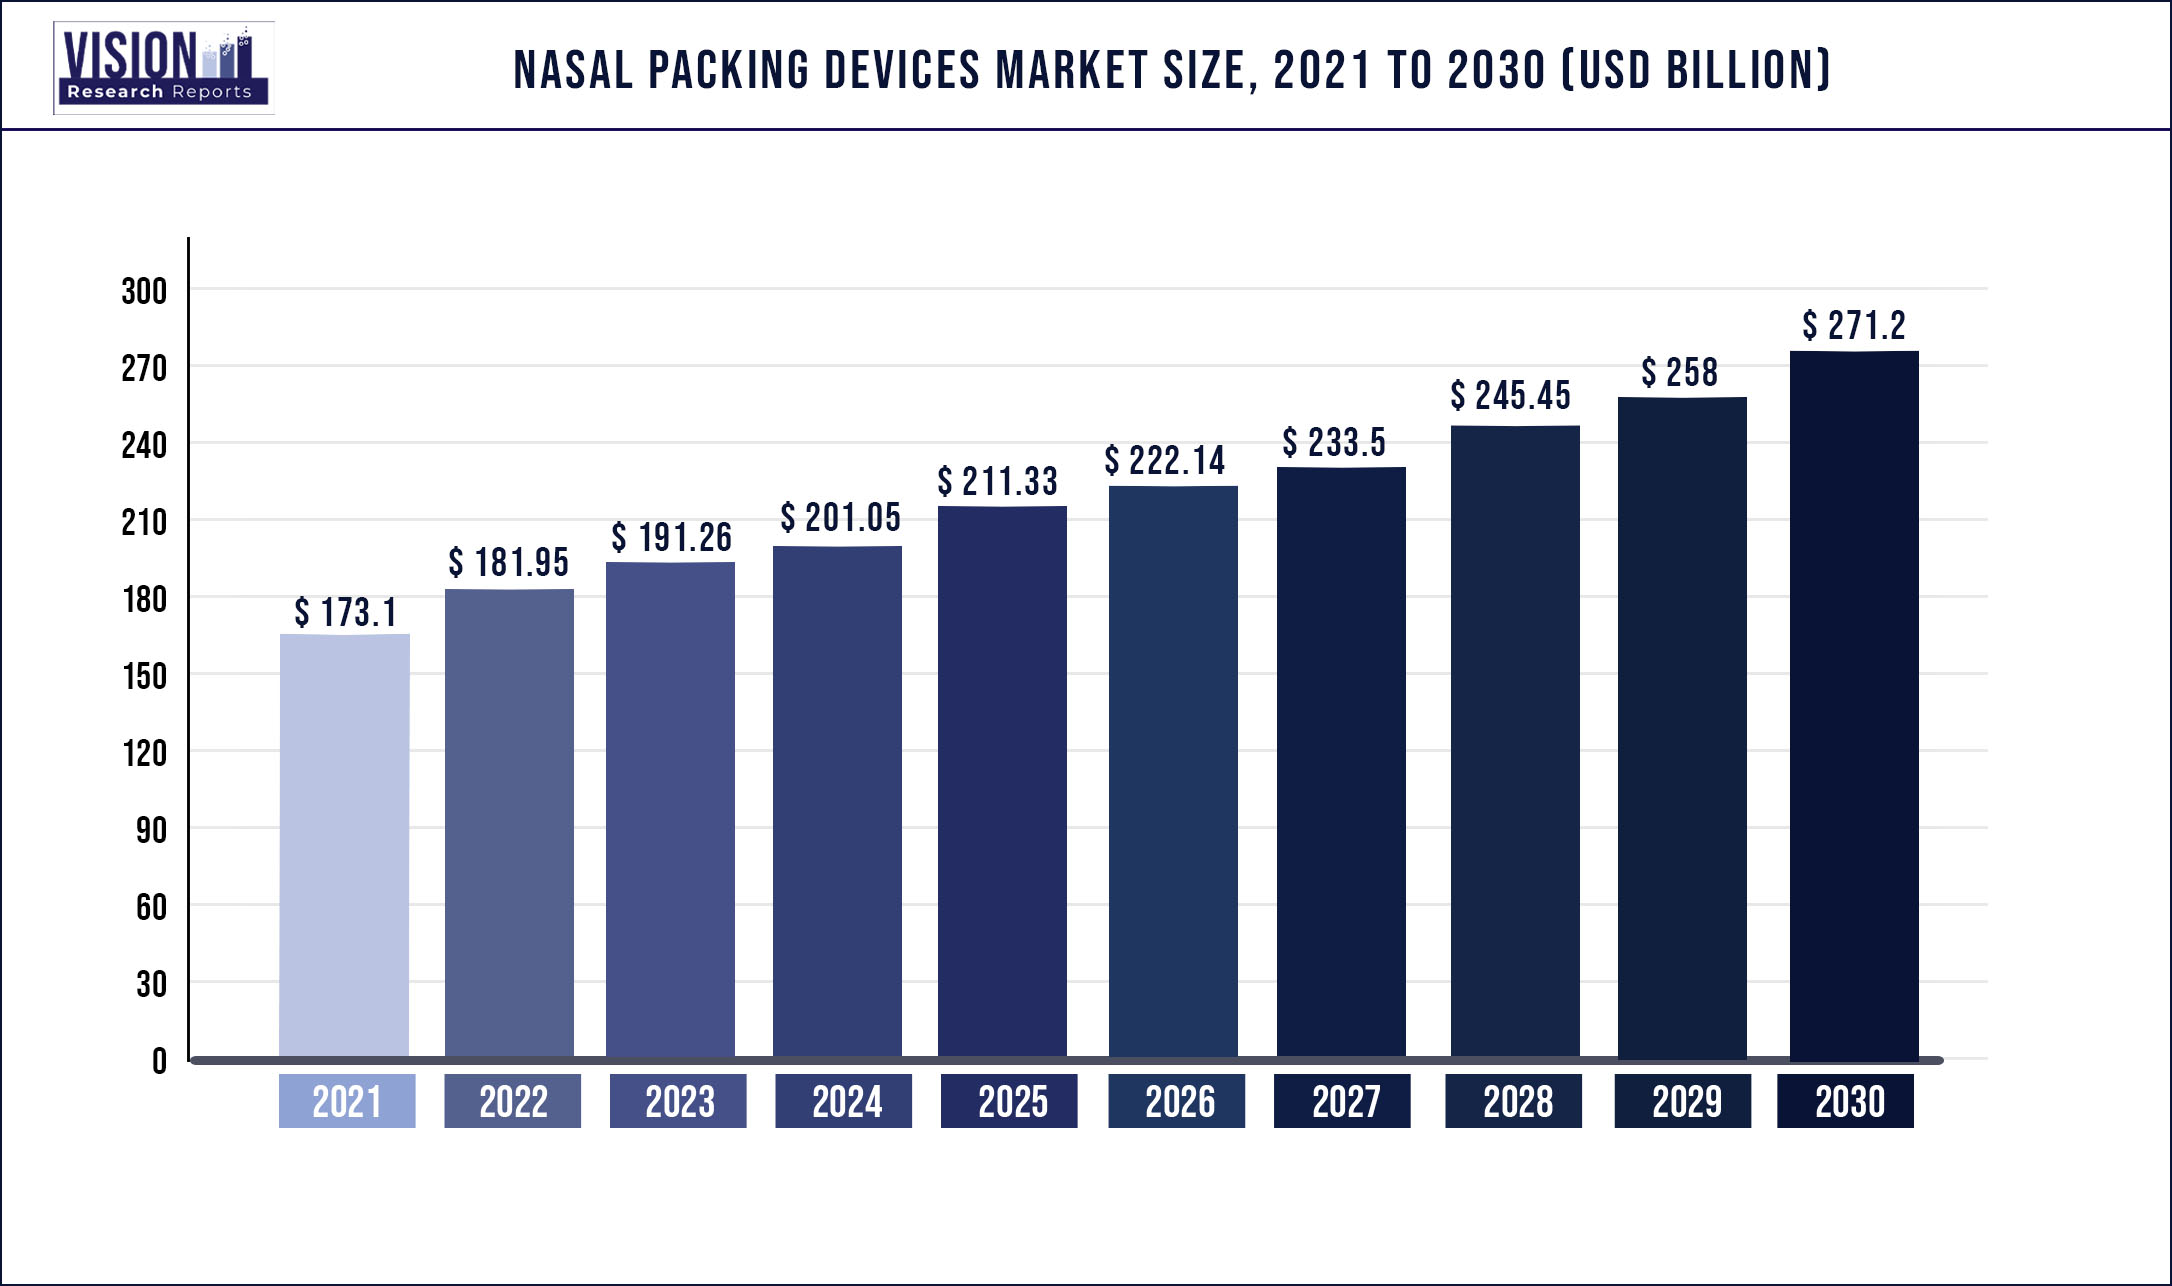 Nasal Packing Devices Market Size 2021 to 2030